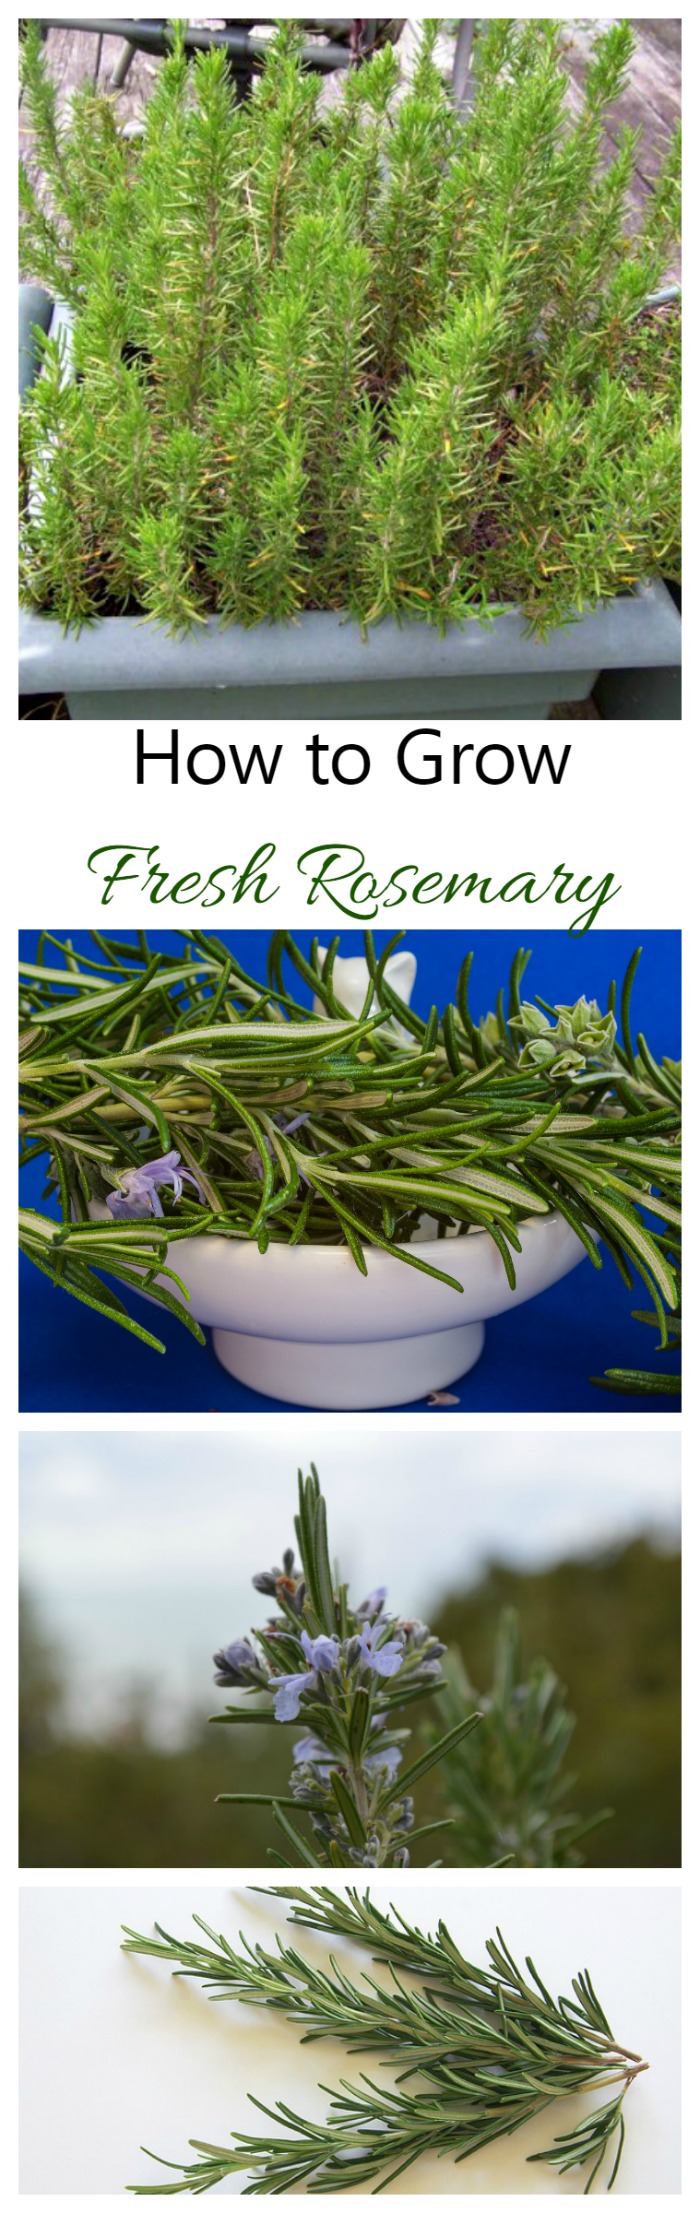 Fresh rosemary is one of my favorite spices to have on hand for cooking. It is very easy to grow on a patio in pots.